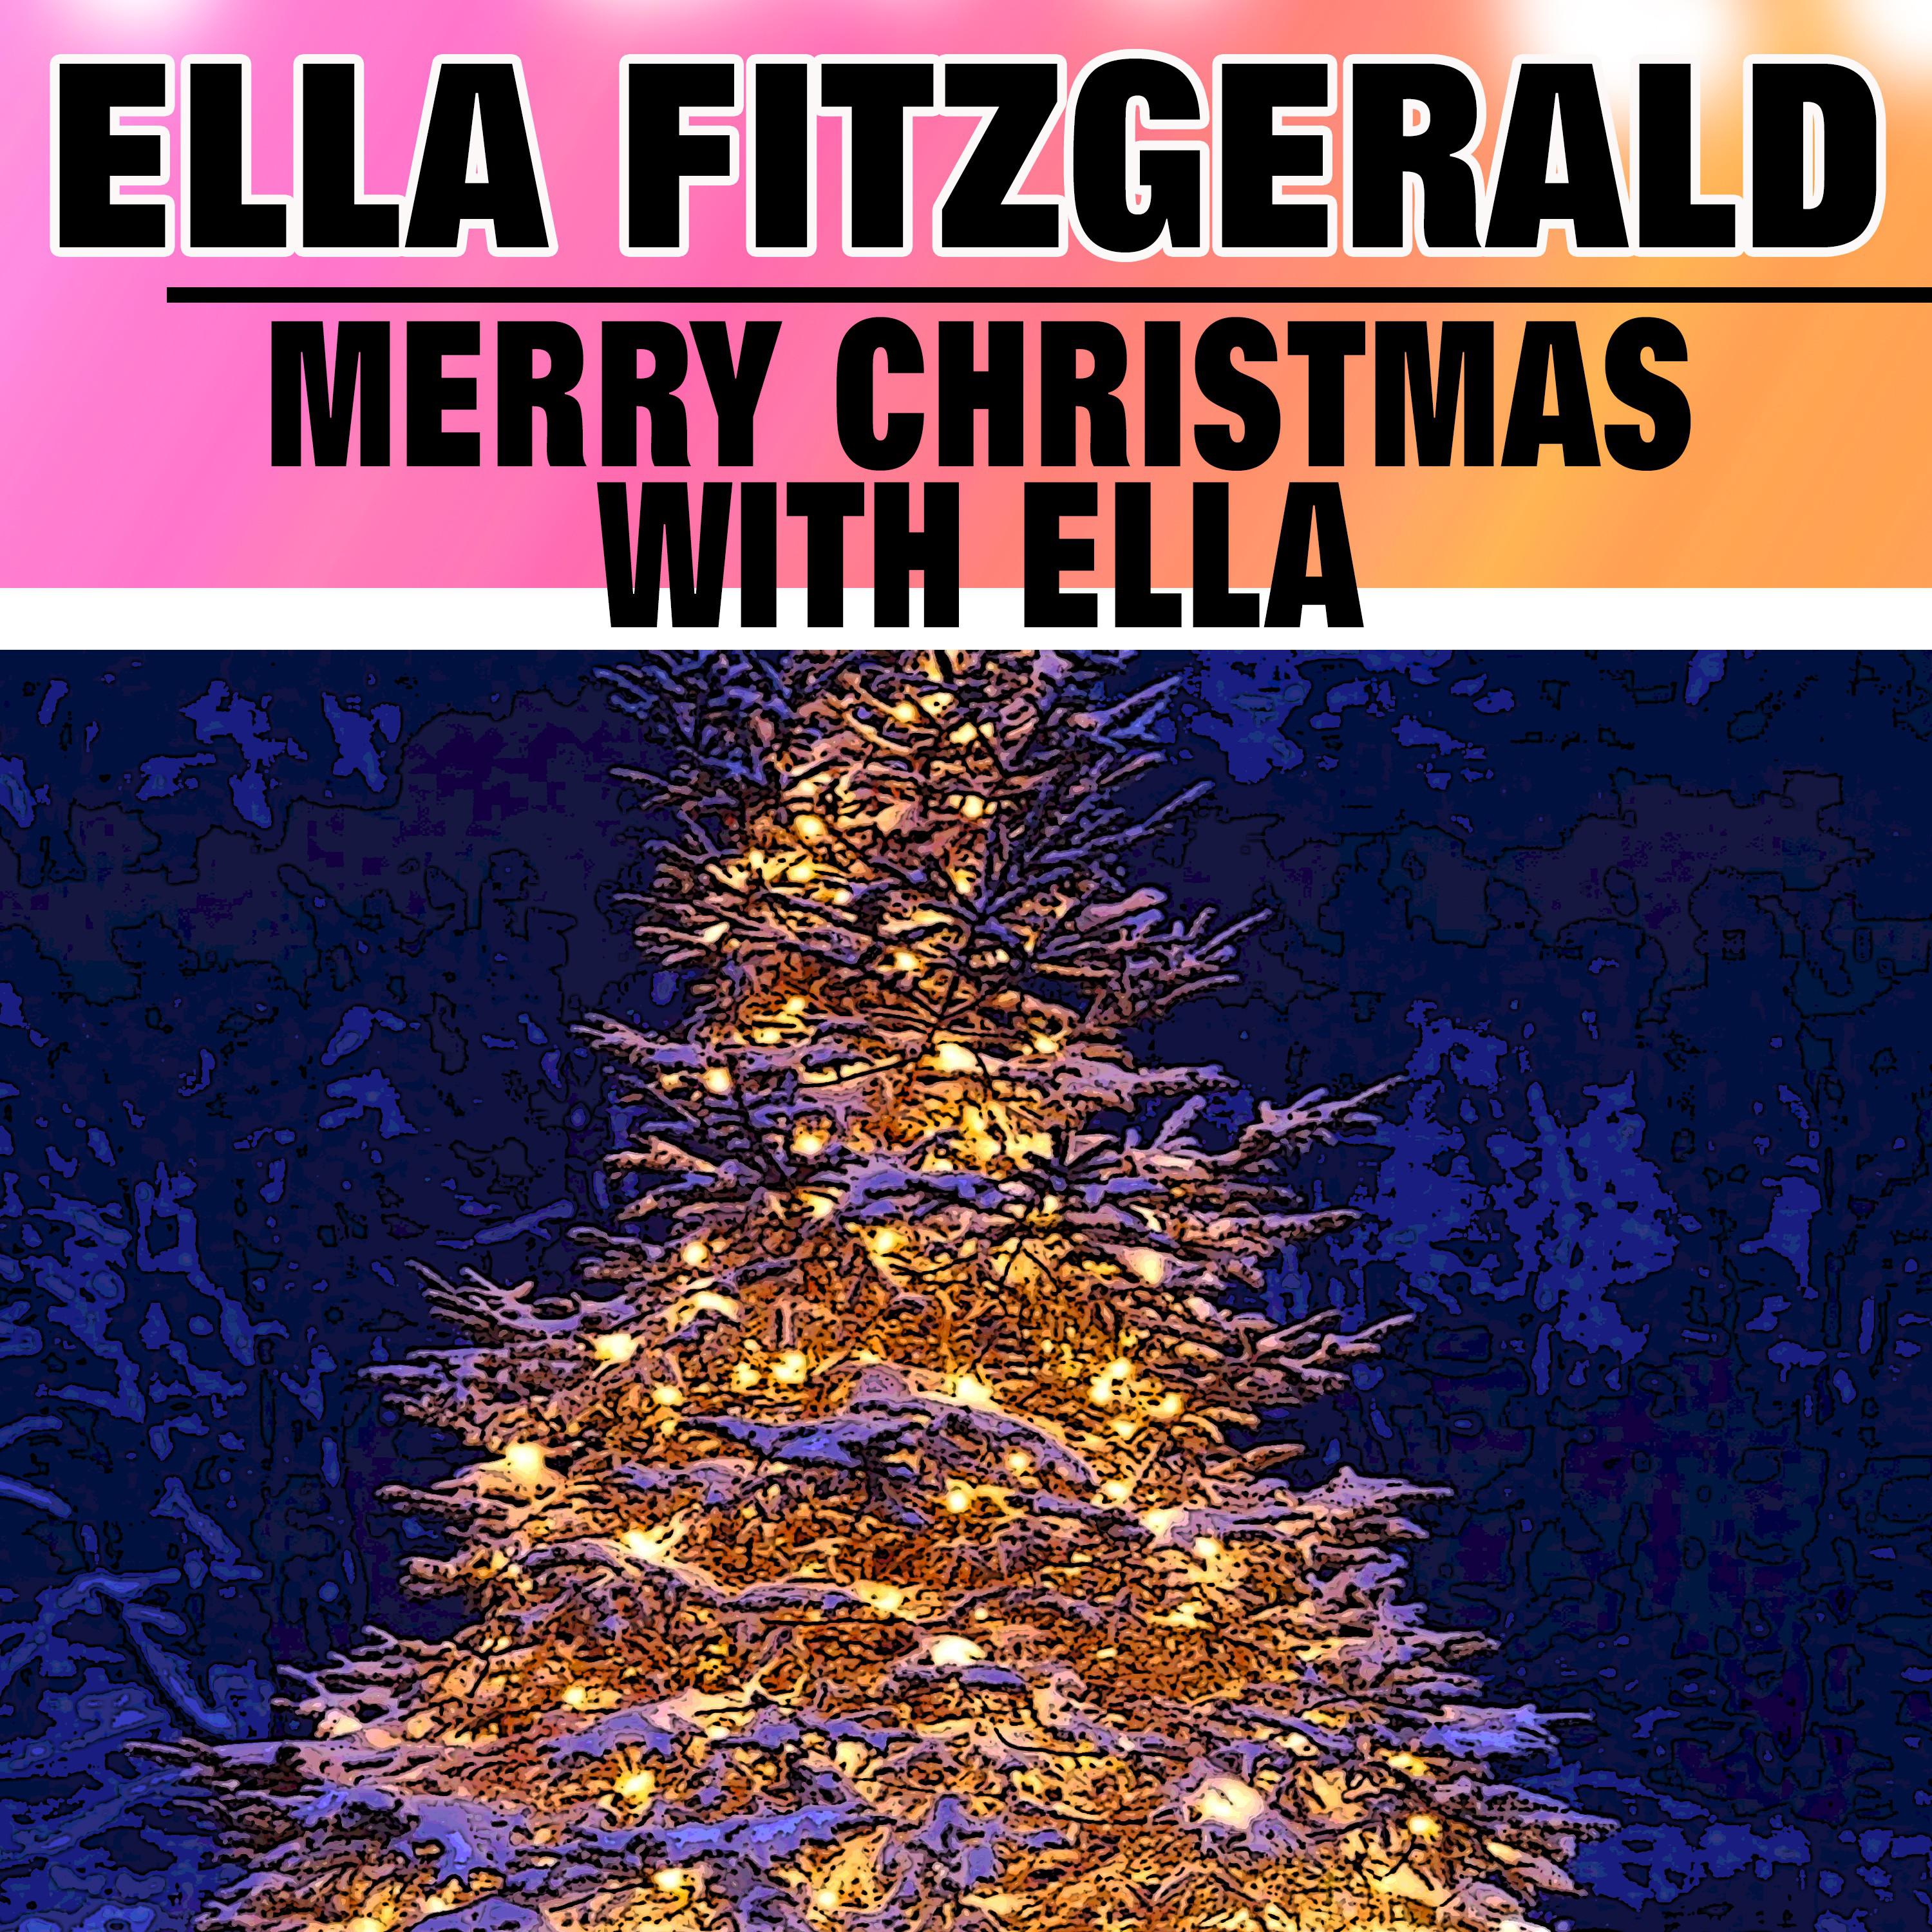 Merry Christmas with Ella